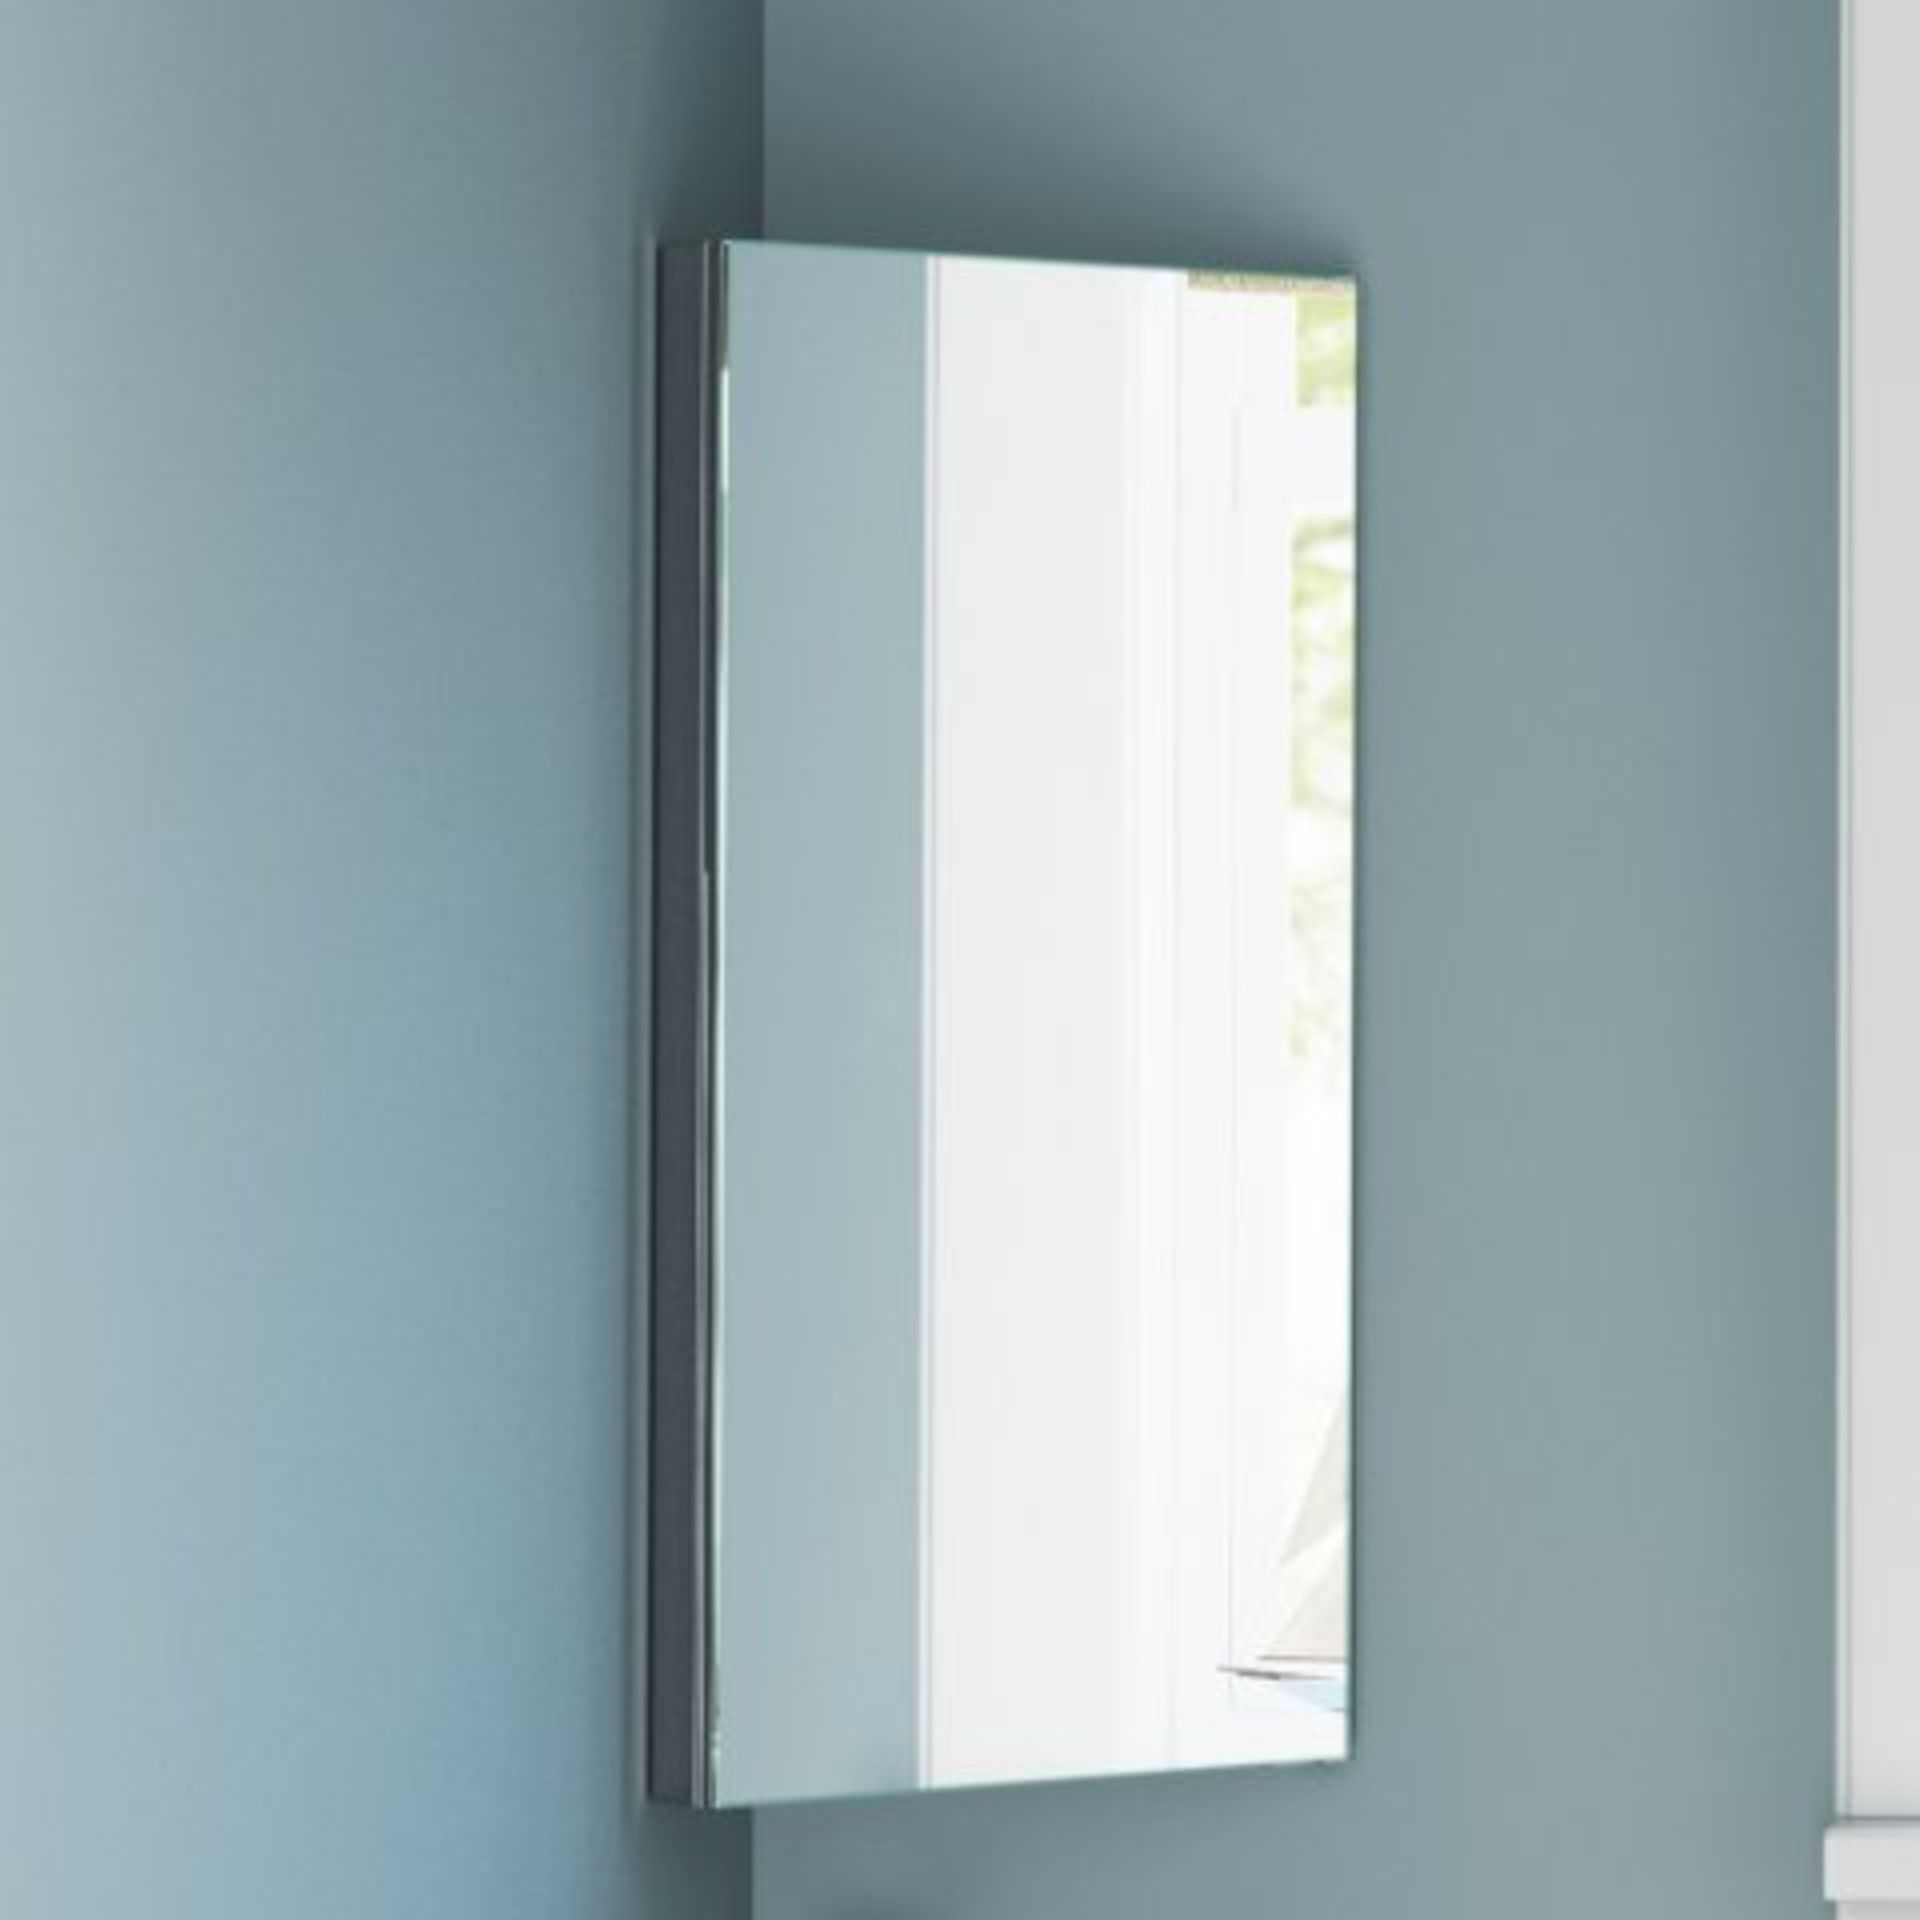 (AA201) 600x300mm Liberty Stainless Steel Corner Mirror Cabinet. RRP £162.99. This stunning mirror